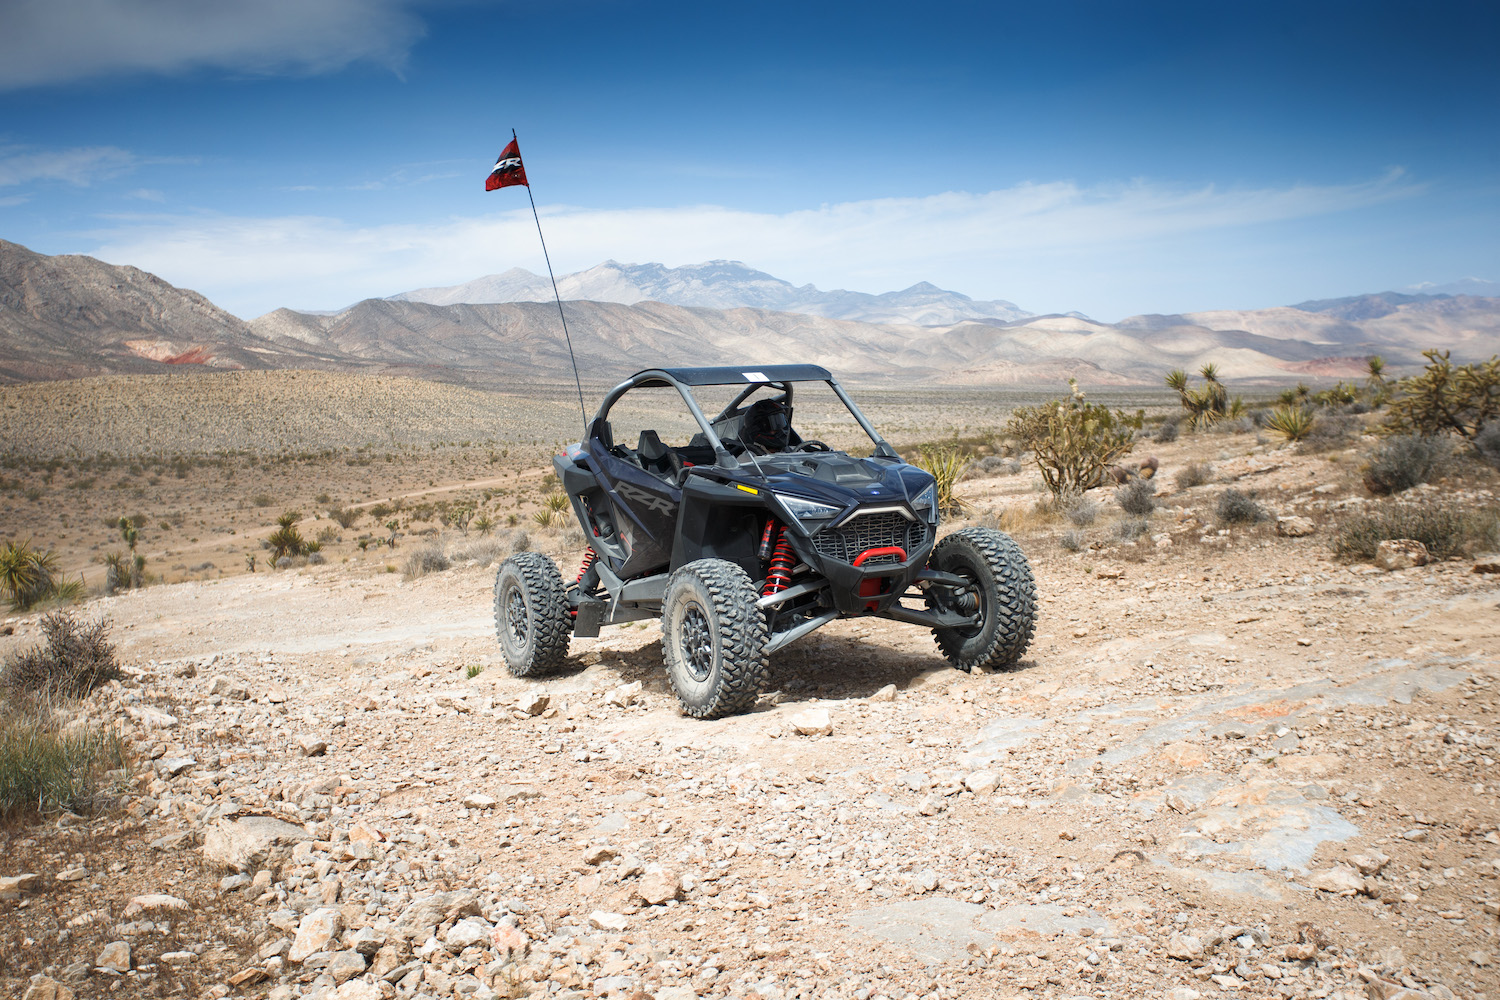 Close up of side angle of Polaris RZR Pro R driving on a rocky dirt trail with a mountain in the background.